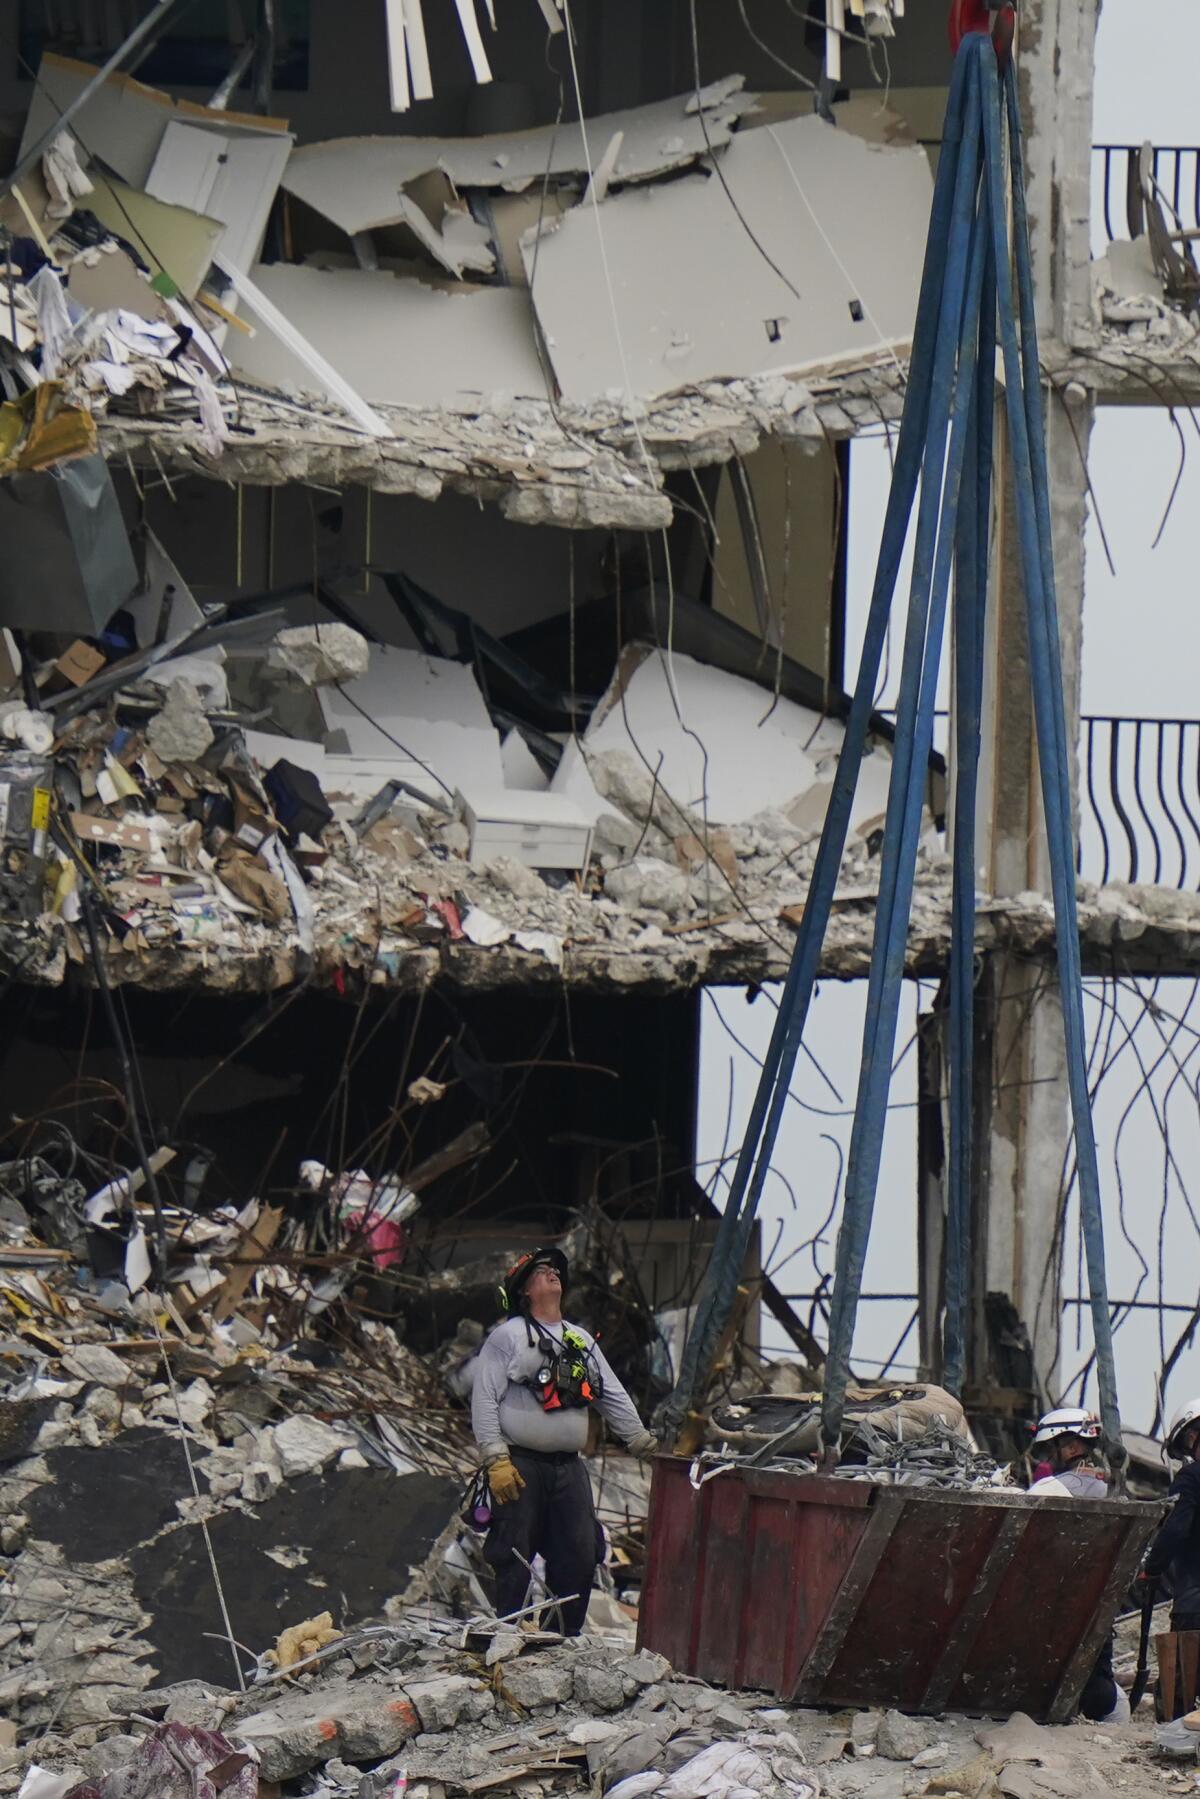 A crane prepares to remove a load of debris at the collapsed building